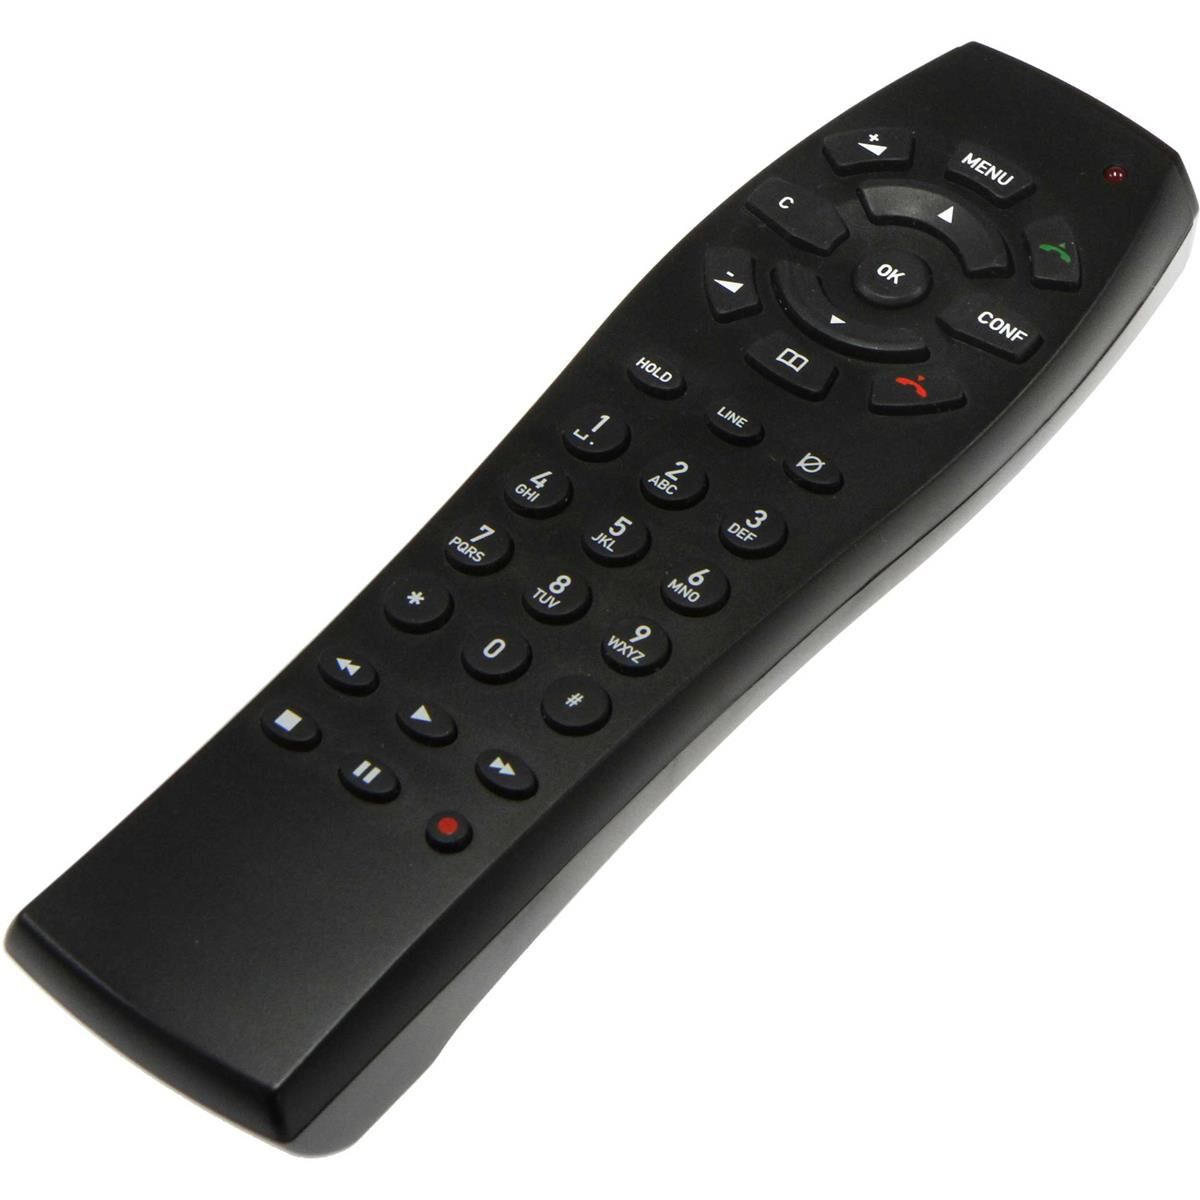 Konftel Remote Control for 300 Series Conference Phones